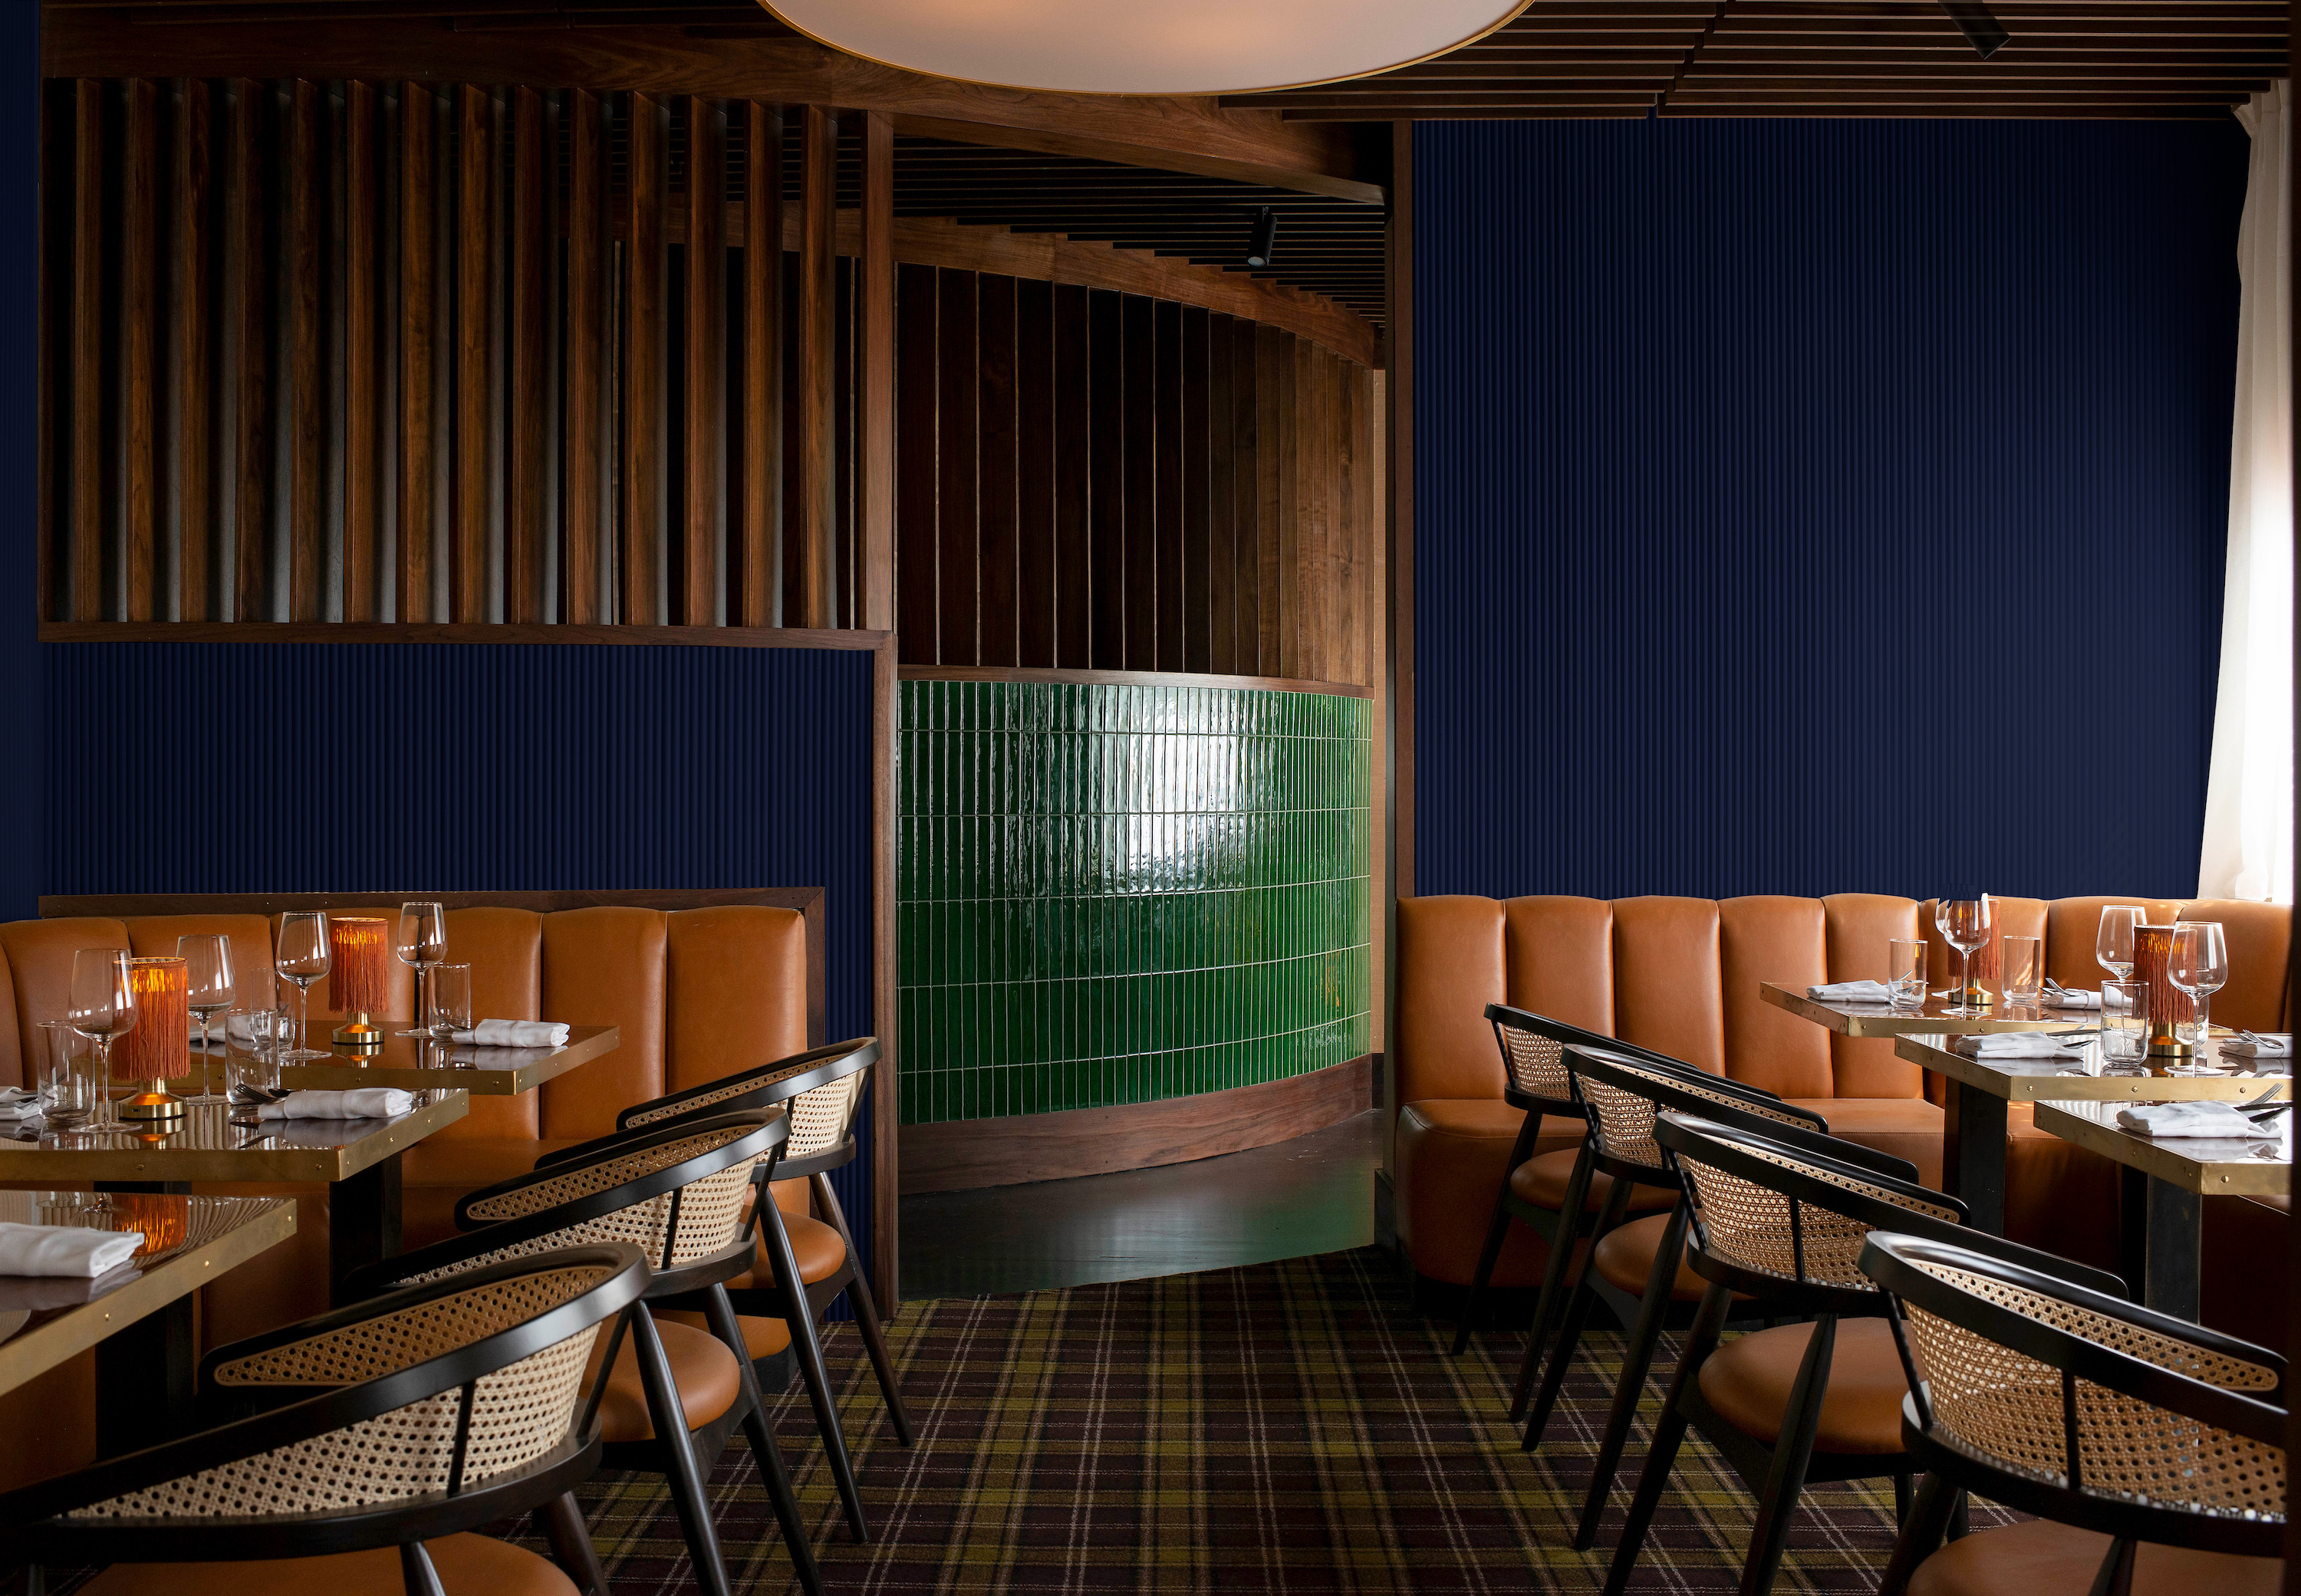 A dining room in a restaurant. It has tan booths, a dark blue wall, wood detailing, and green tile